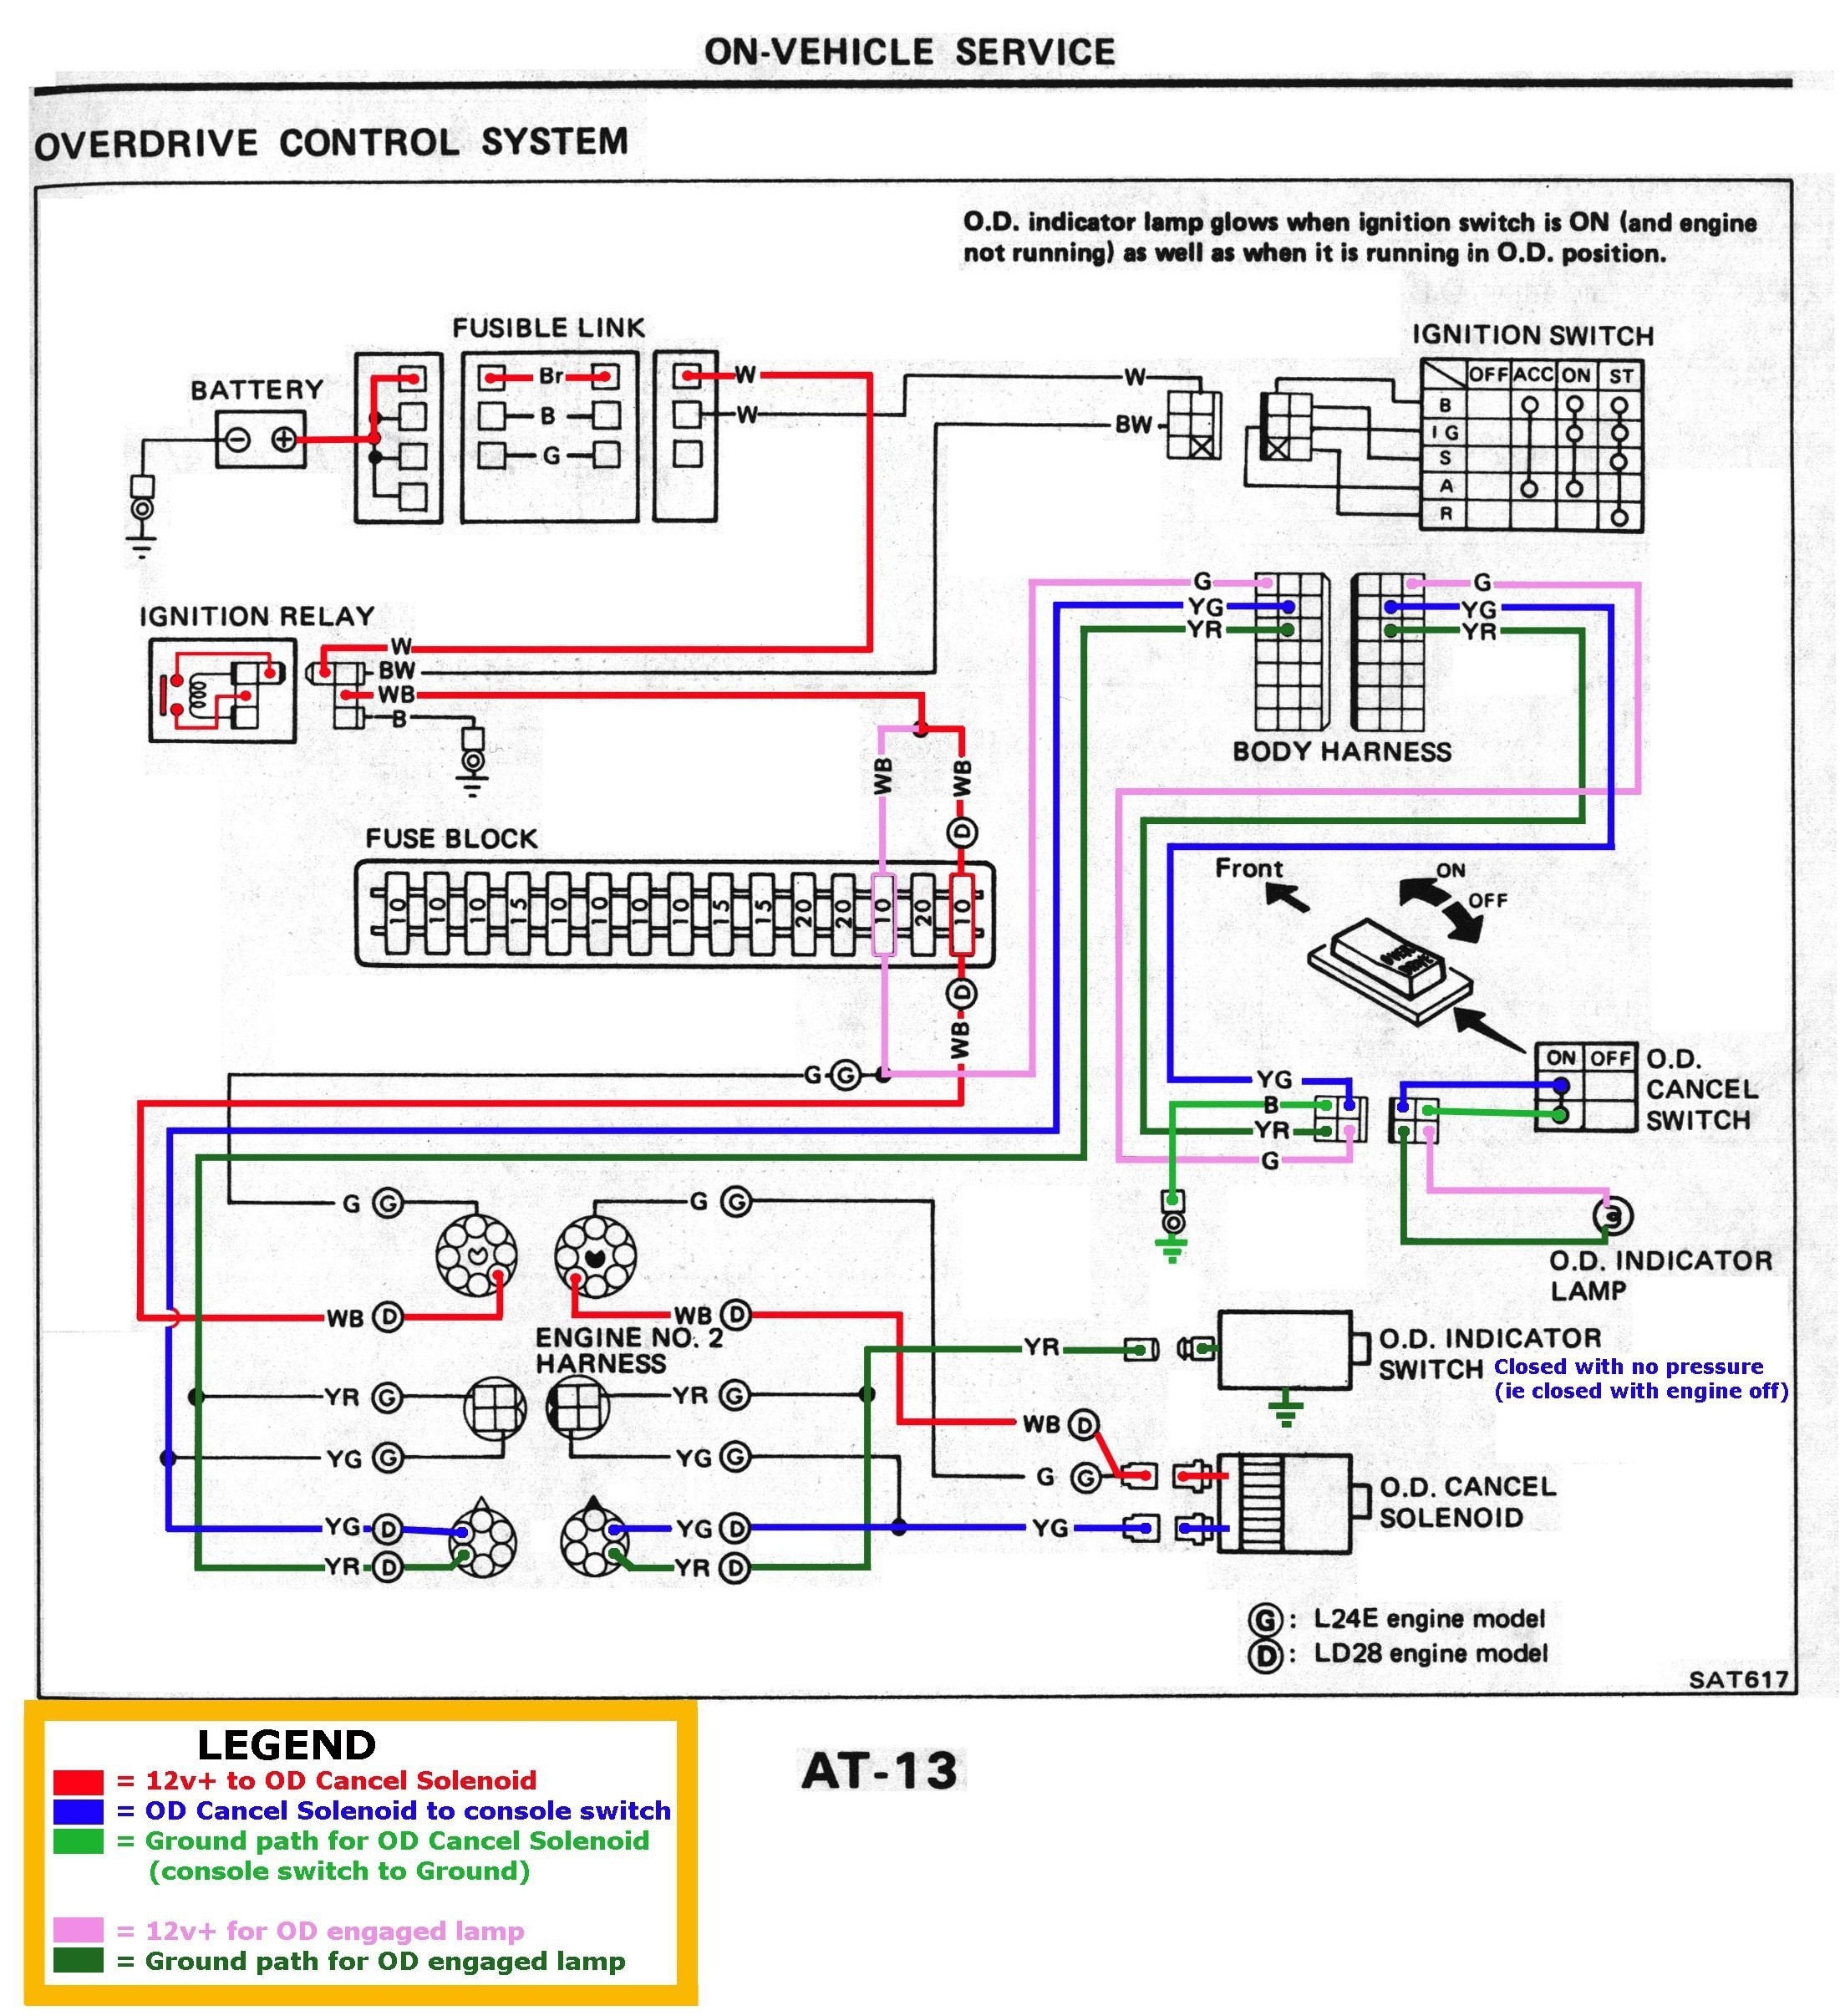 Central Air Conditioner Wiring Diagram Wiring Diagram Air Conditioner Inverter Inspirationa Wiring Diagram Of Central Air Conditioner Wiring Diagram